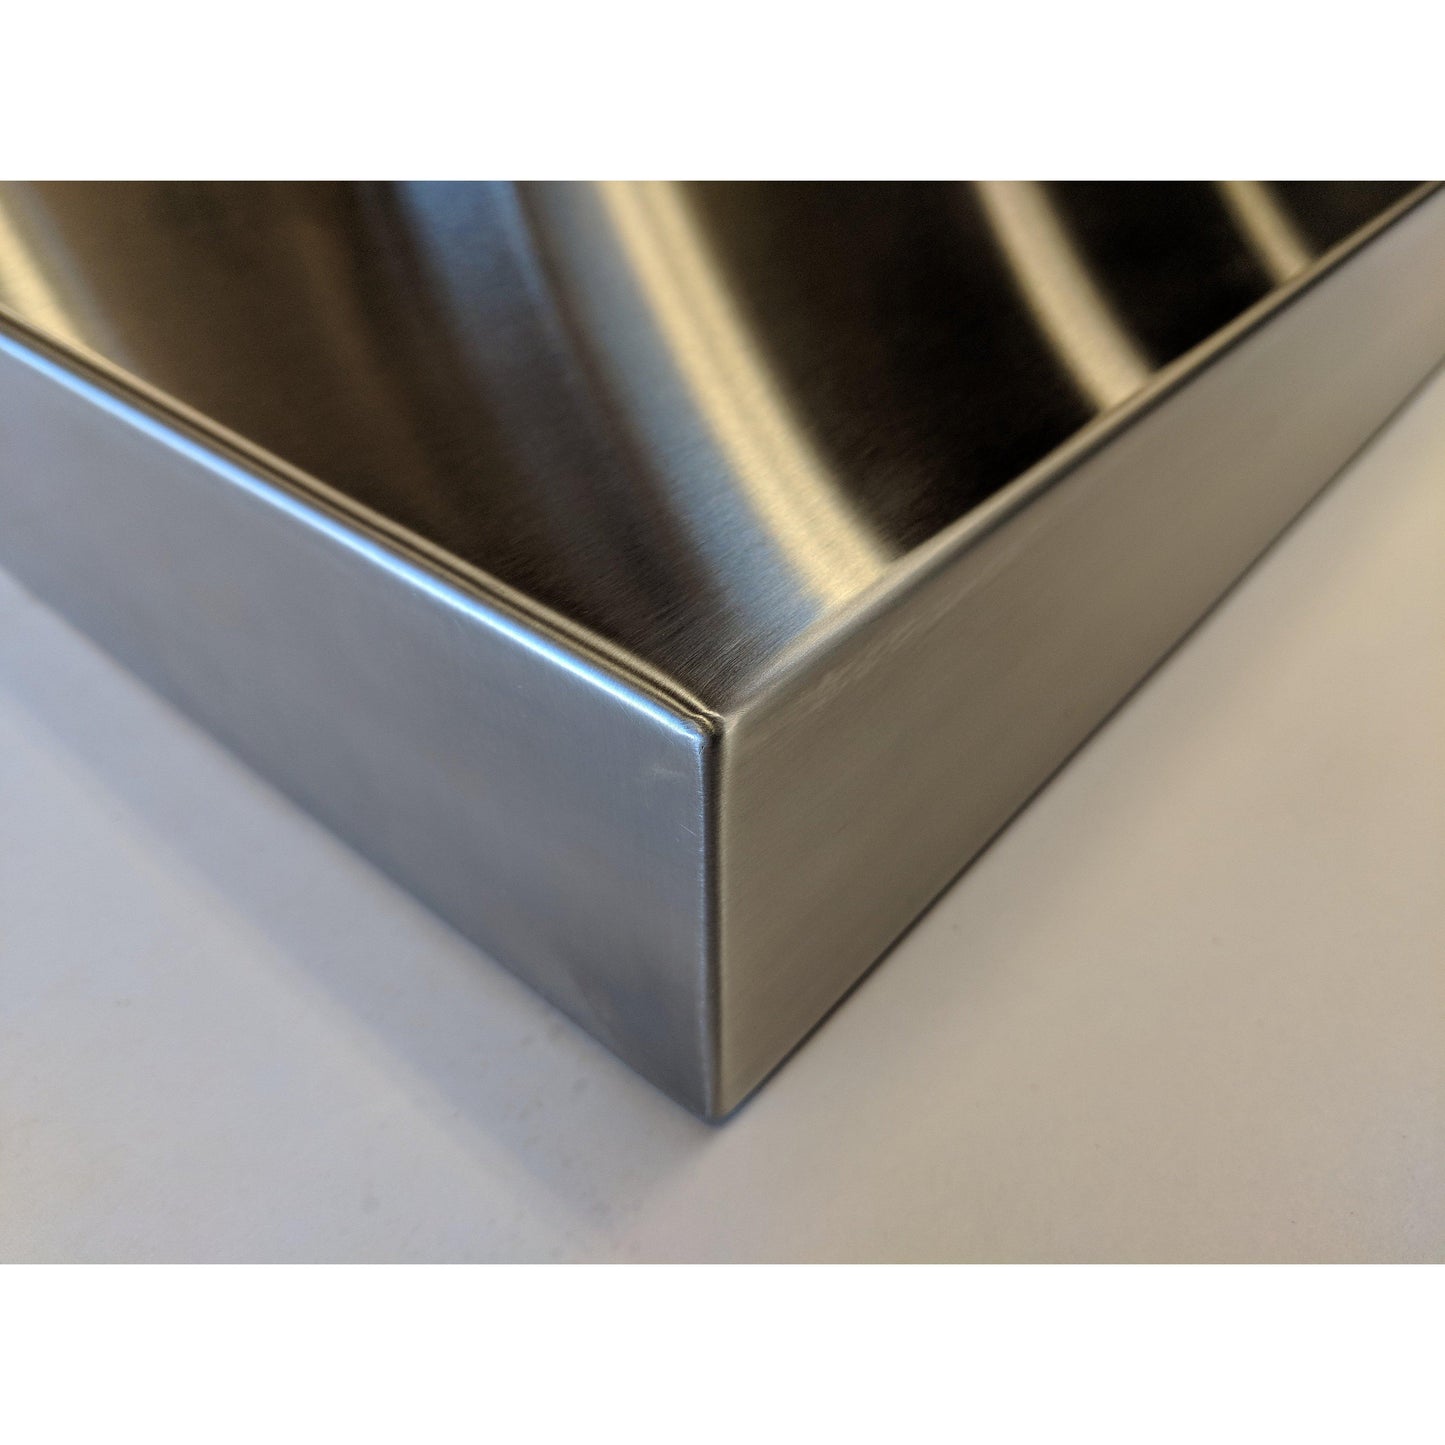 Stainless Steel Floating Shelf for Kitchen